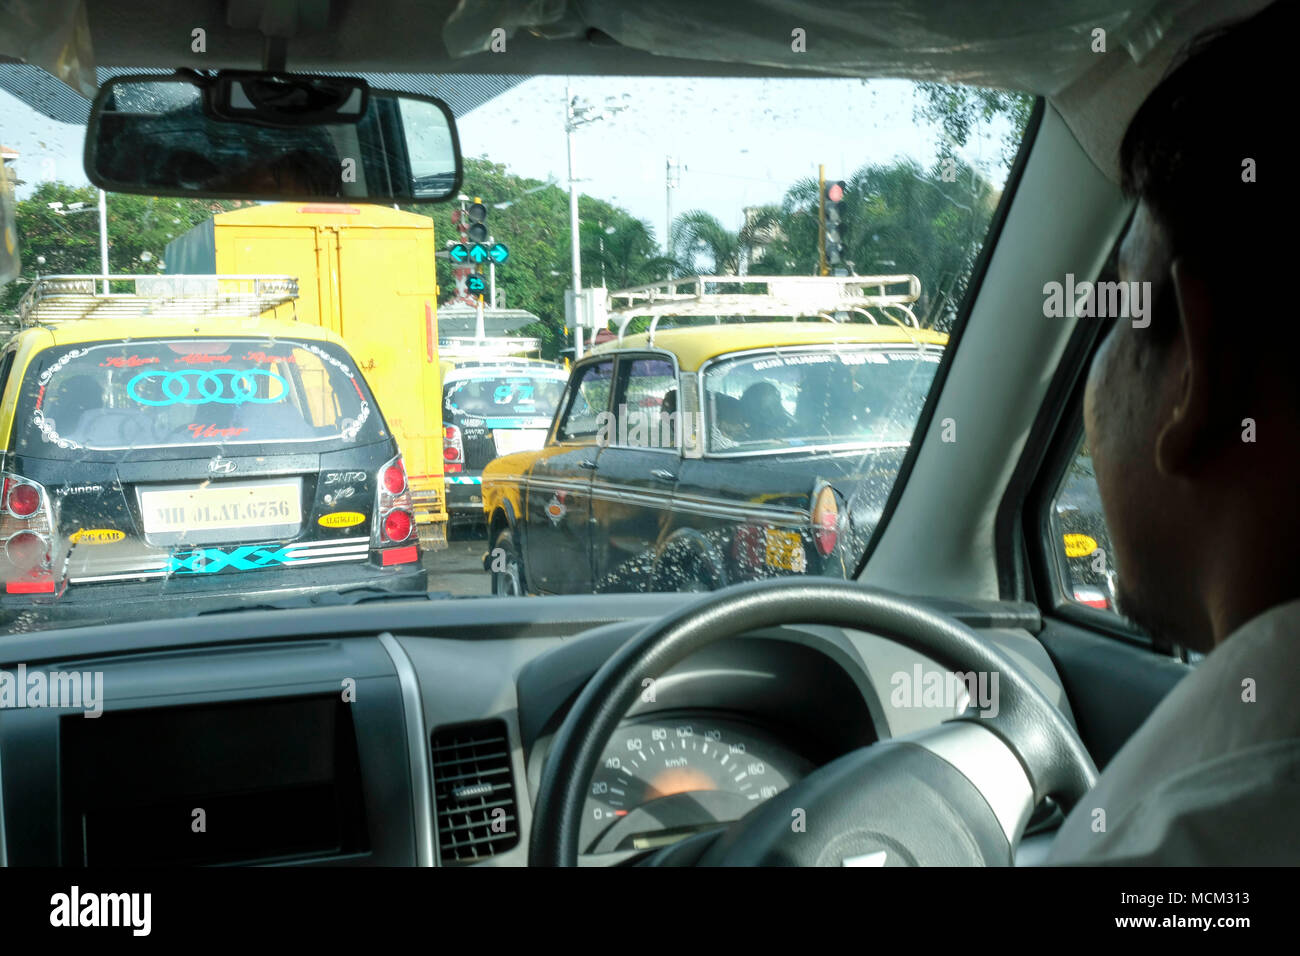 Taxi cab ride with taxis in the street in central Mumbai Stock Photo